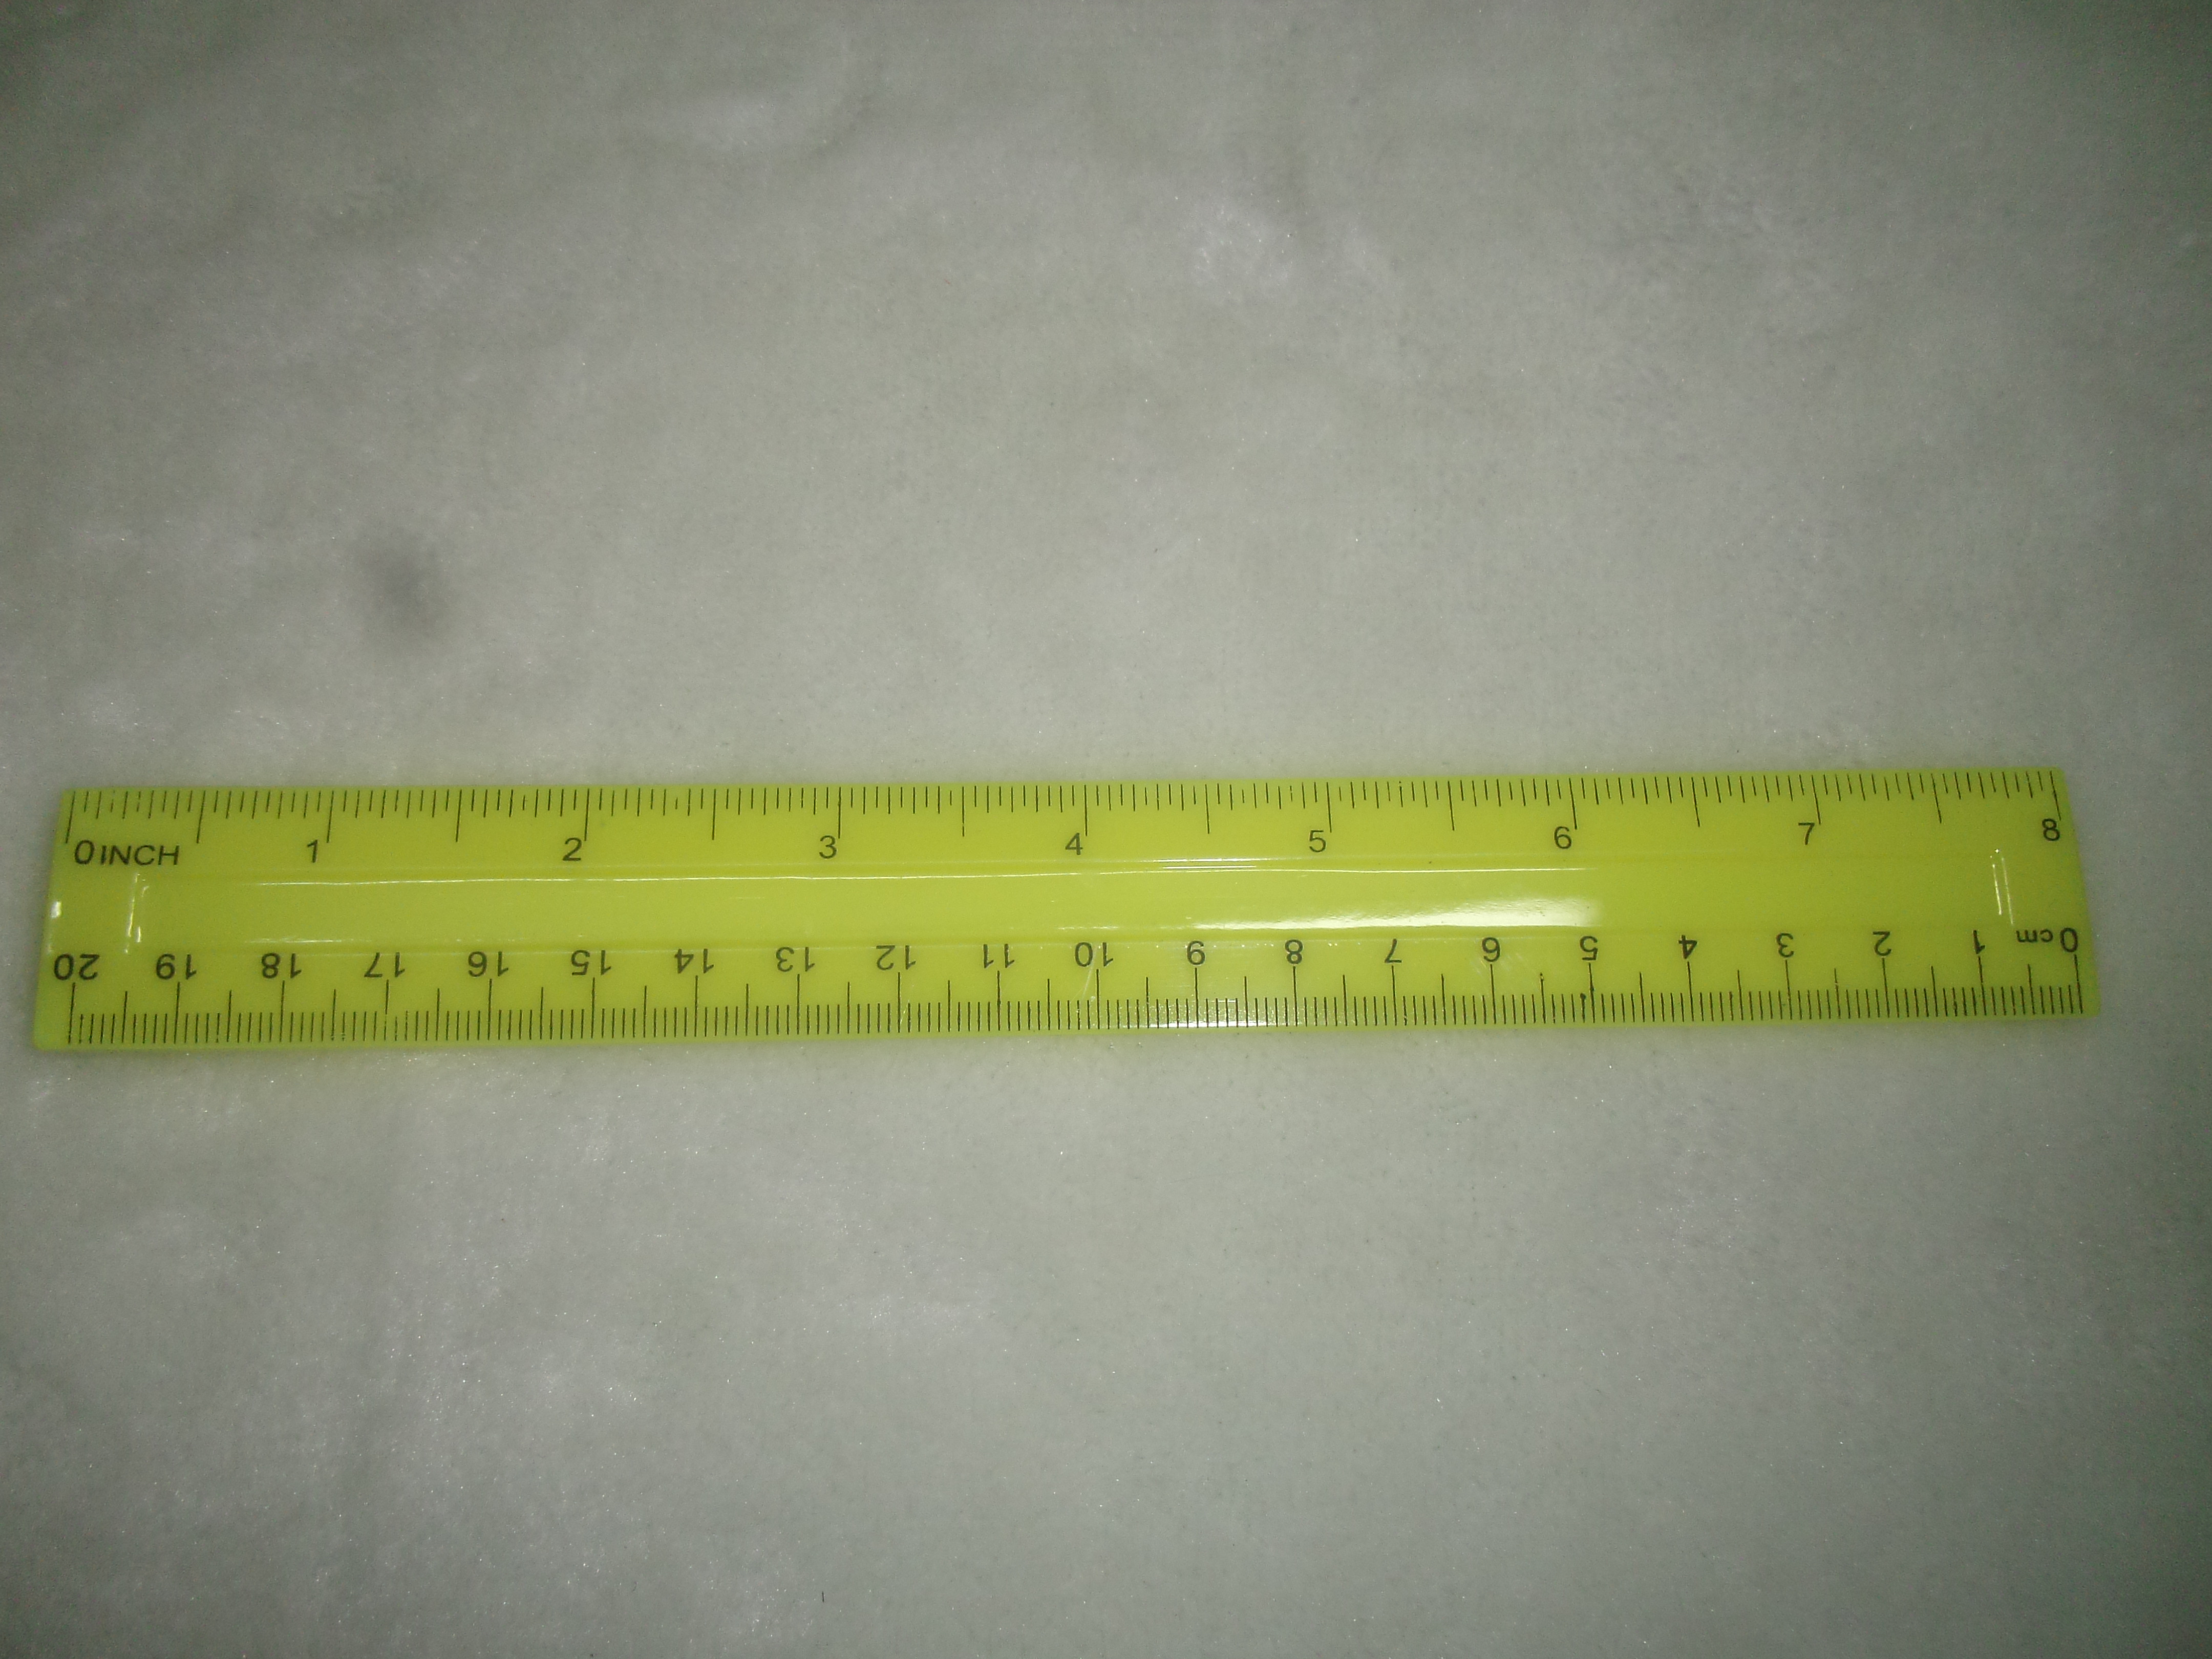 double side printed plastic ruler with 20cm ruler